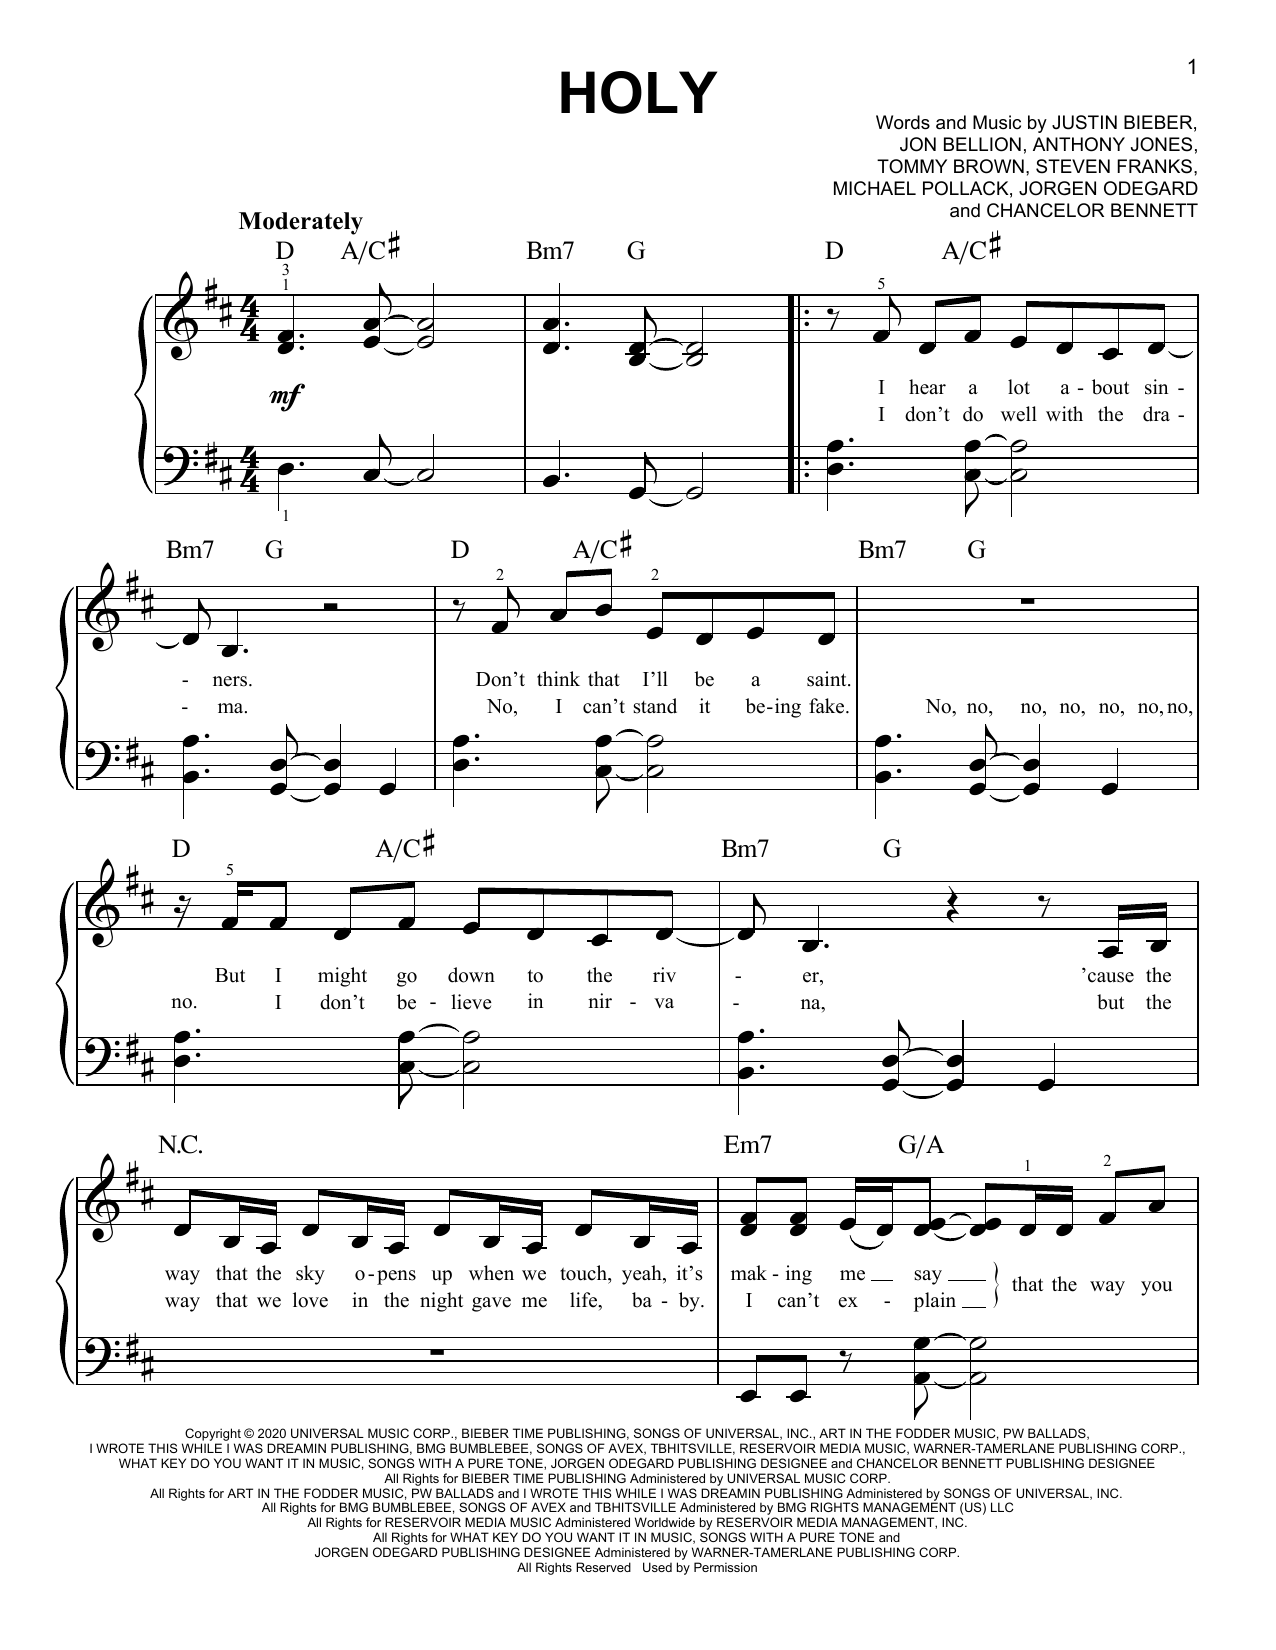 Download Justin Bieber Holy (feat. Chance the Rapper) Sheet Music